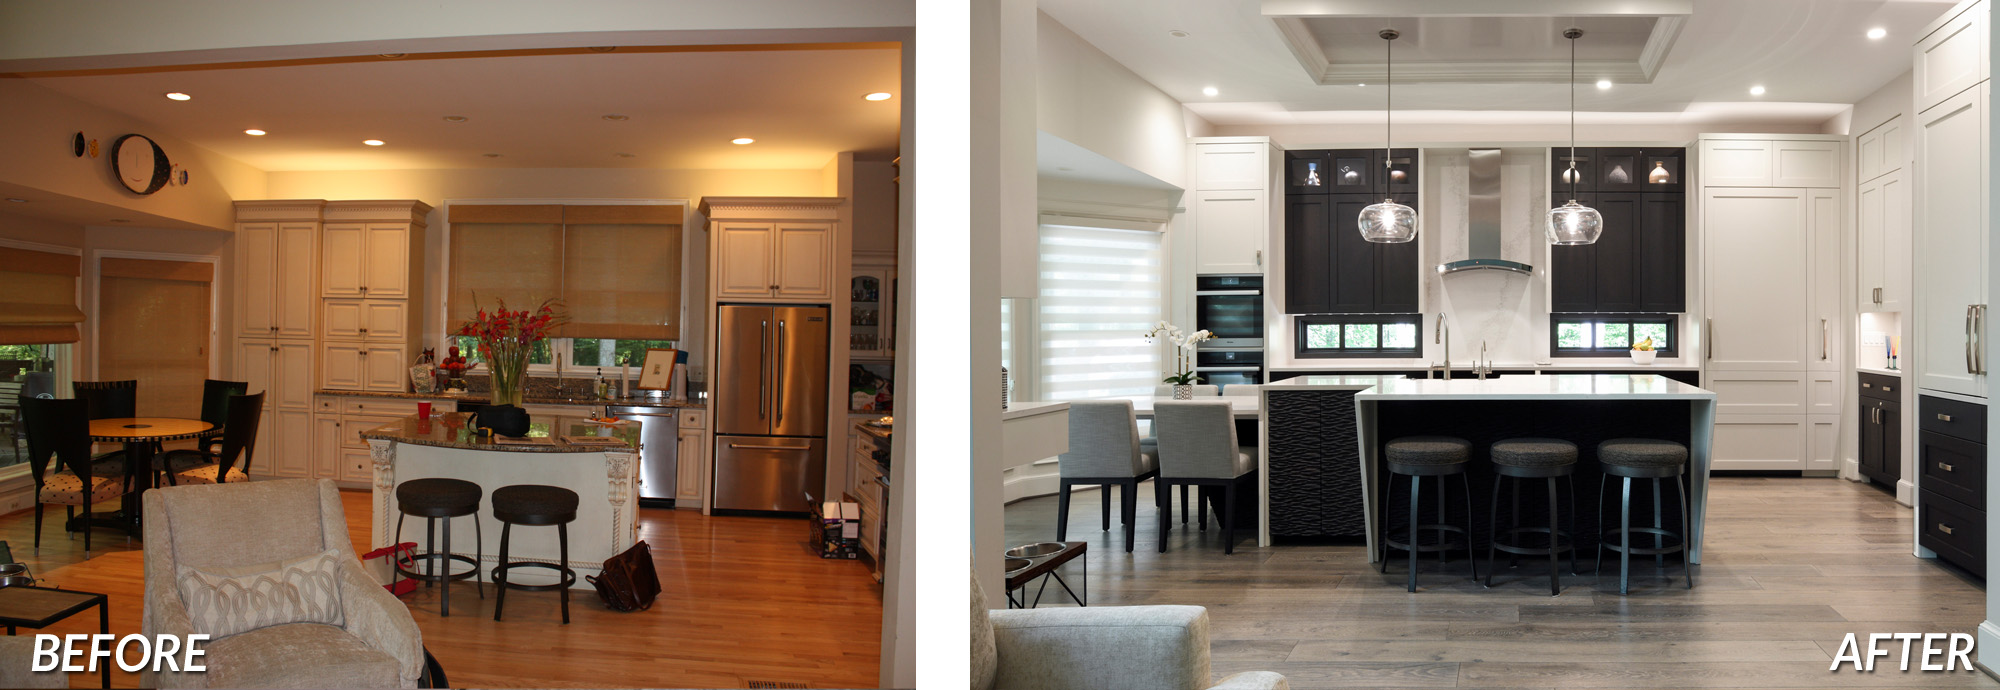 BOWA Design Design Build - McLean Contemporary Main Level Renovation Before & After